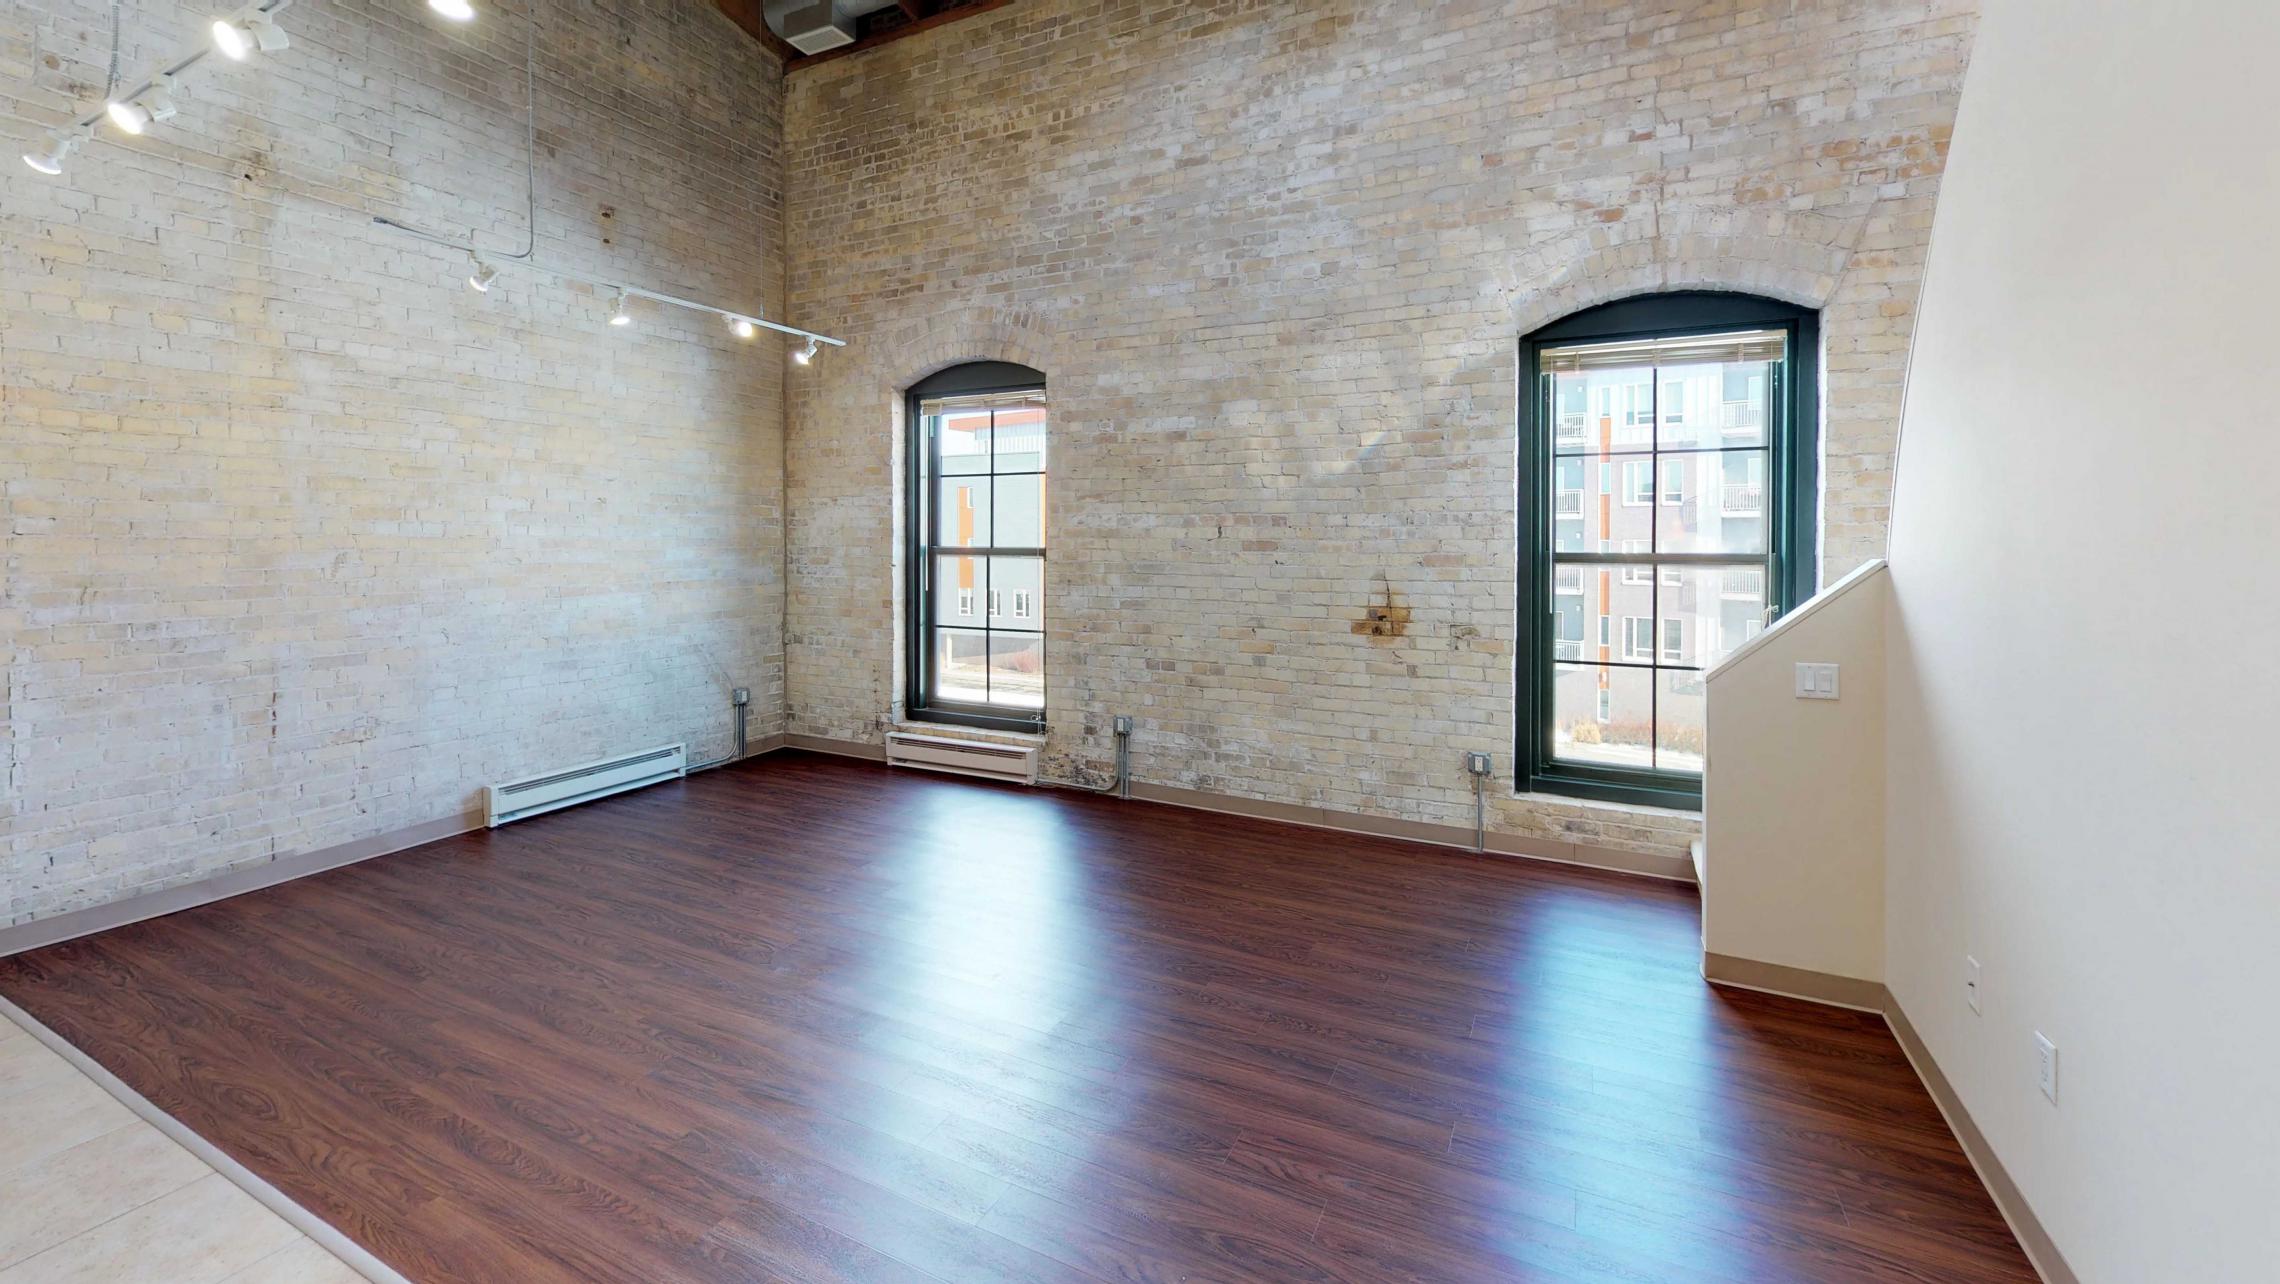 E307-Historic-Downtown-Lofted-Two-Bedroom-Madison-Exposed-Brick-Design-Beams-Dining-Tobacco-Lofts